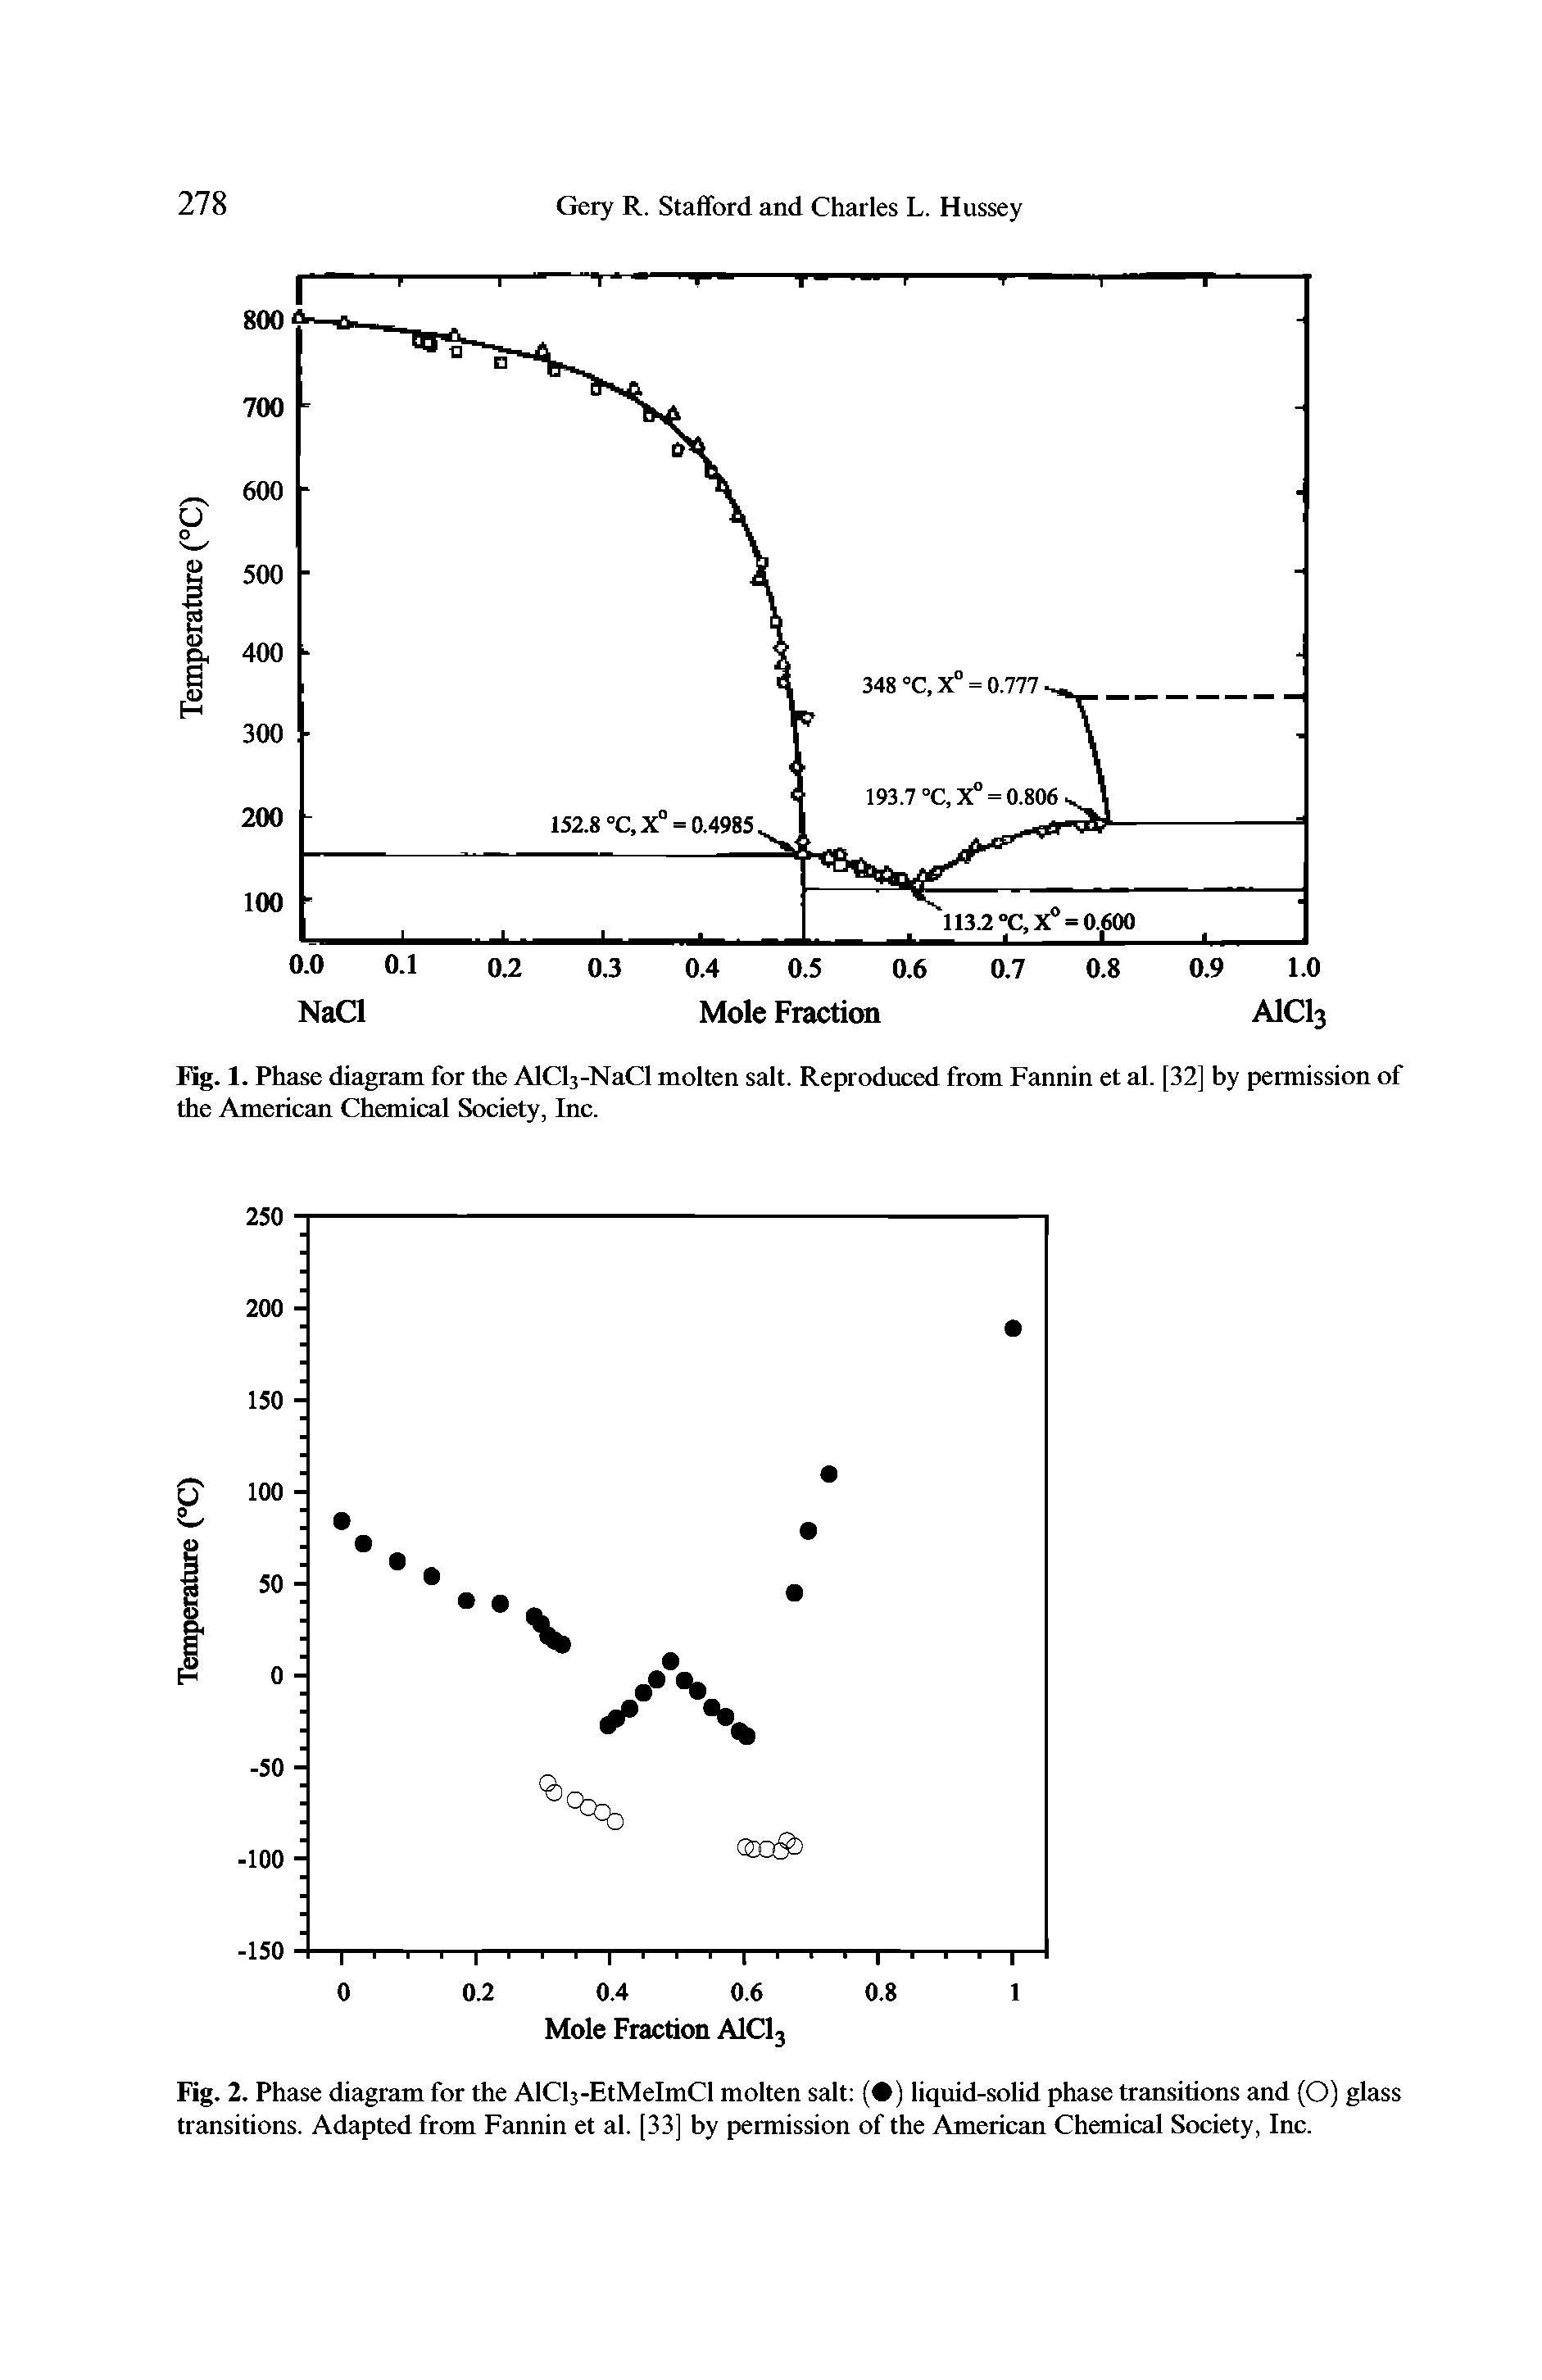 Fig. 2. Phase diagram for the AlCl -EtMeImCl molten salt ( ) liquid-solid phase transitions and (O) glass transitions. Adapted from Fannin et al. [33] by permission of the American Chemical Society, Inc.